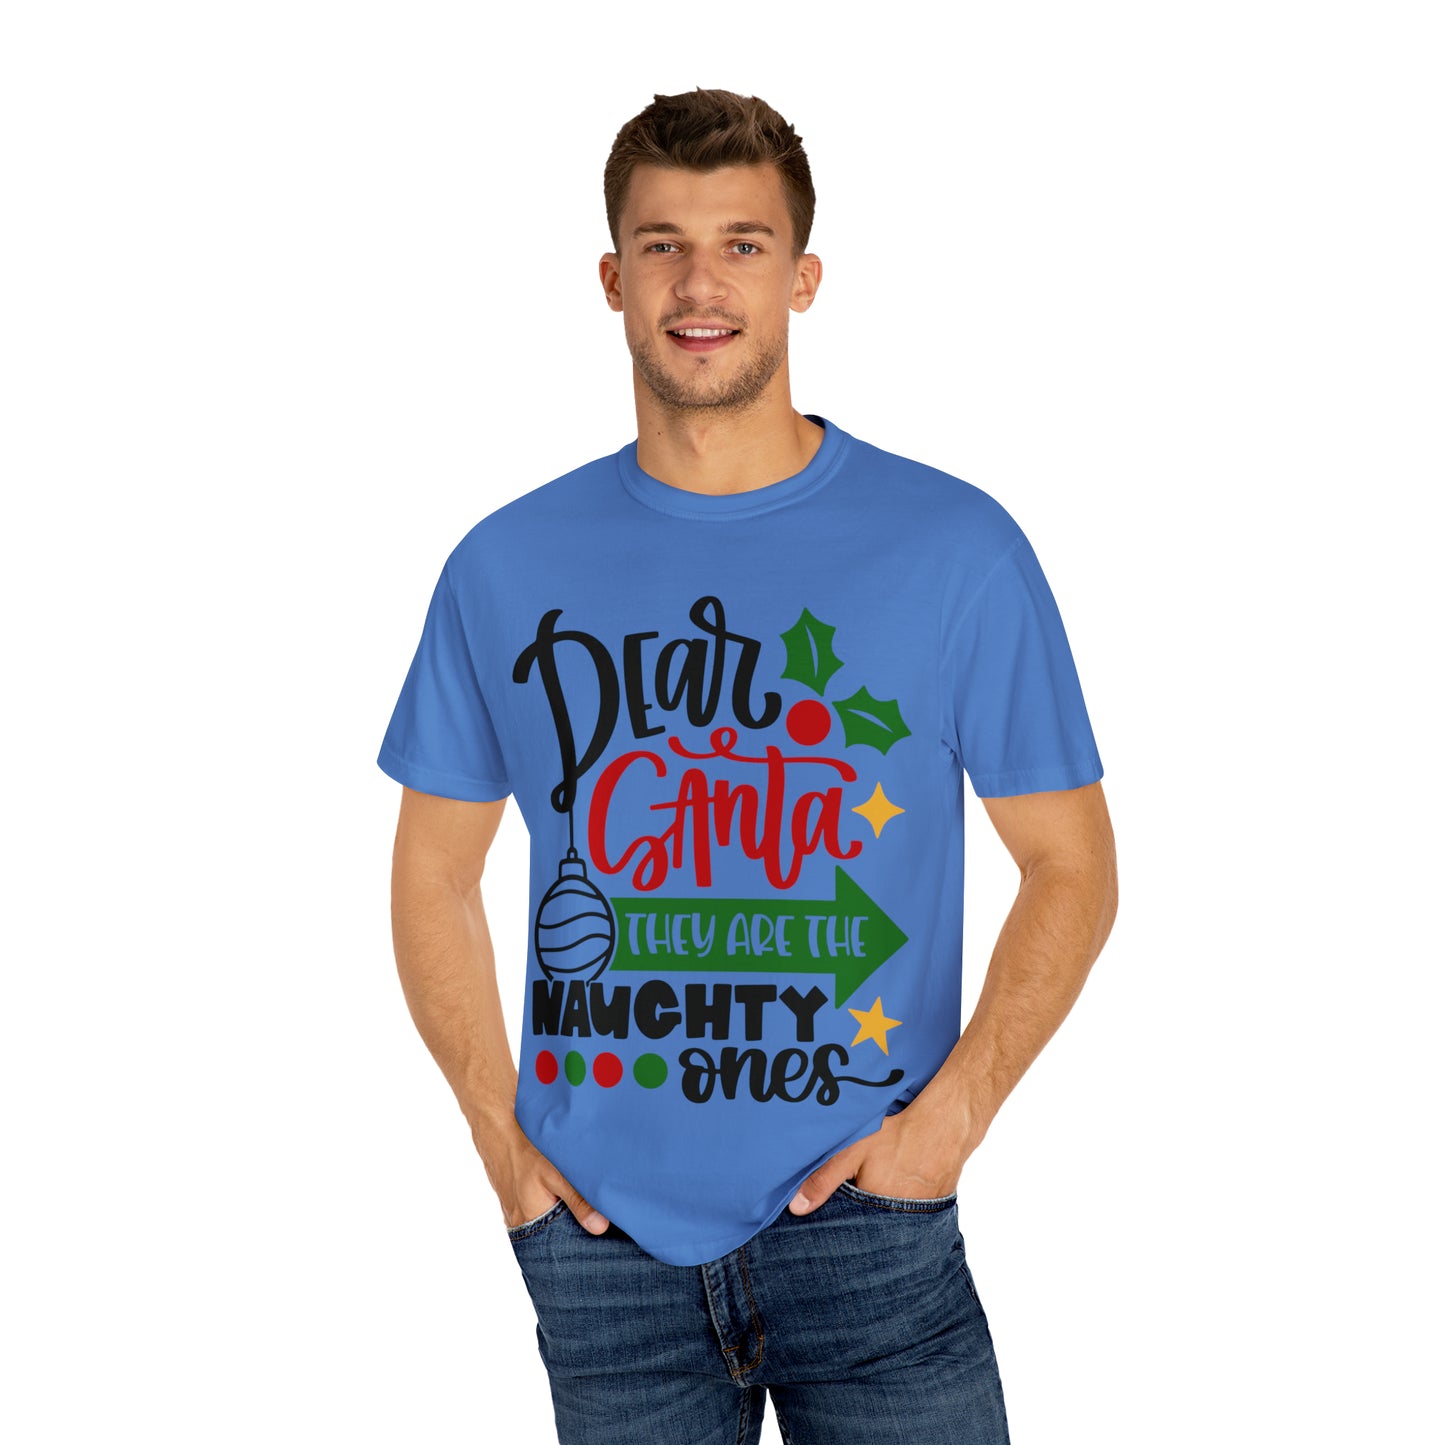 Dear Santa They Are the Naughty Ones Unisex Garment-Dyed T-shirt